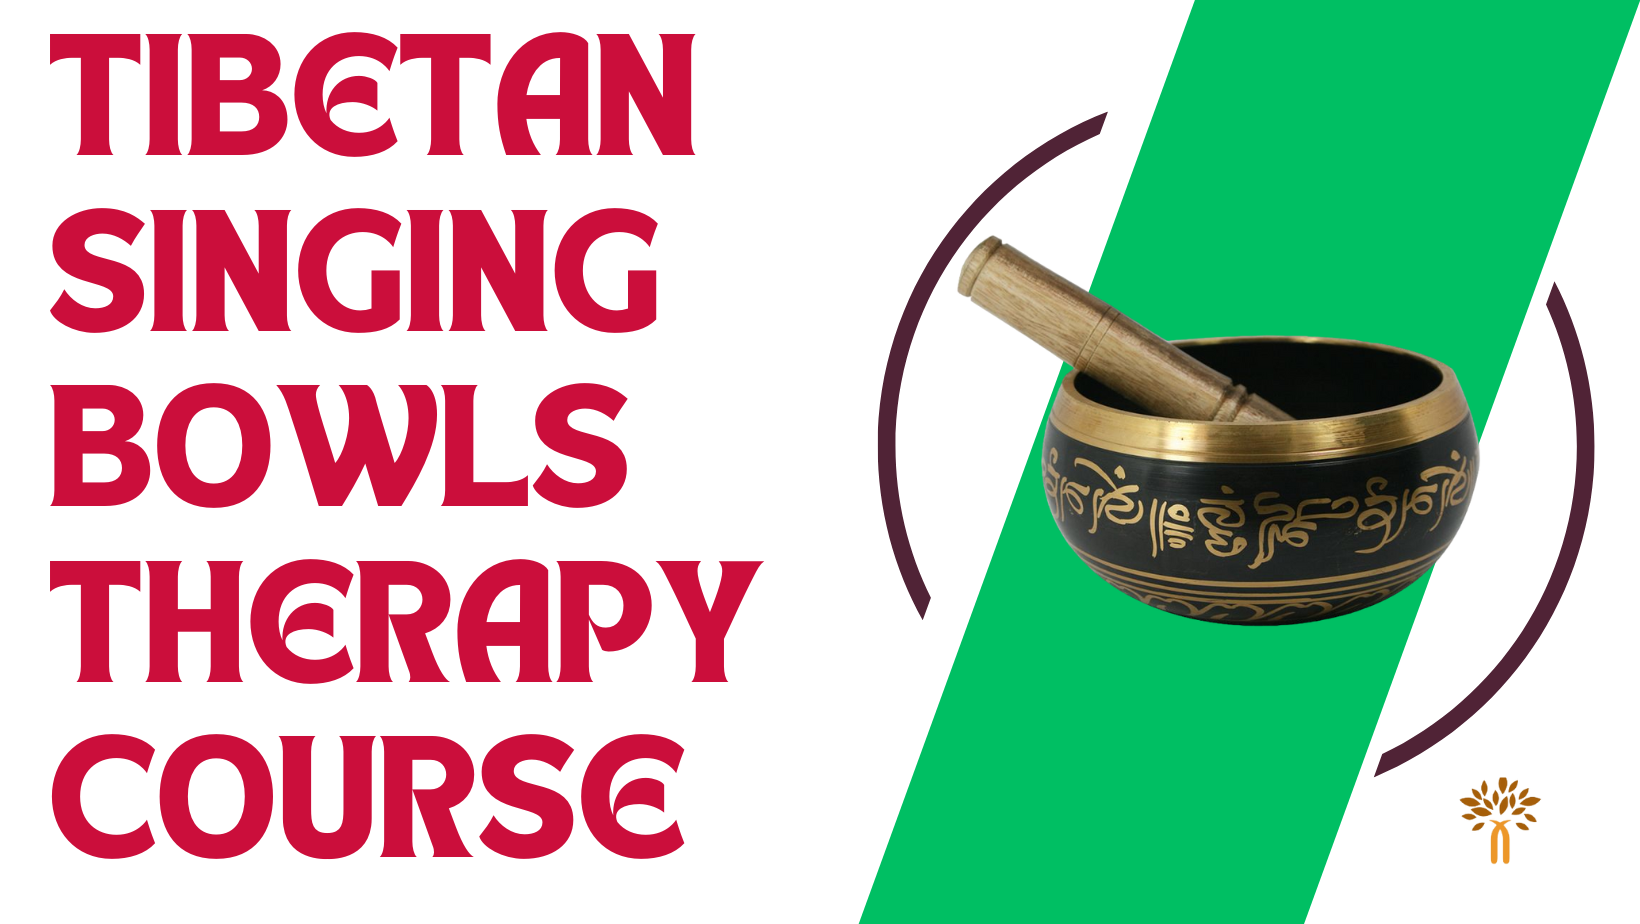 Tibetan Singing Bowls Therapy Courses in Coimbatore